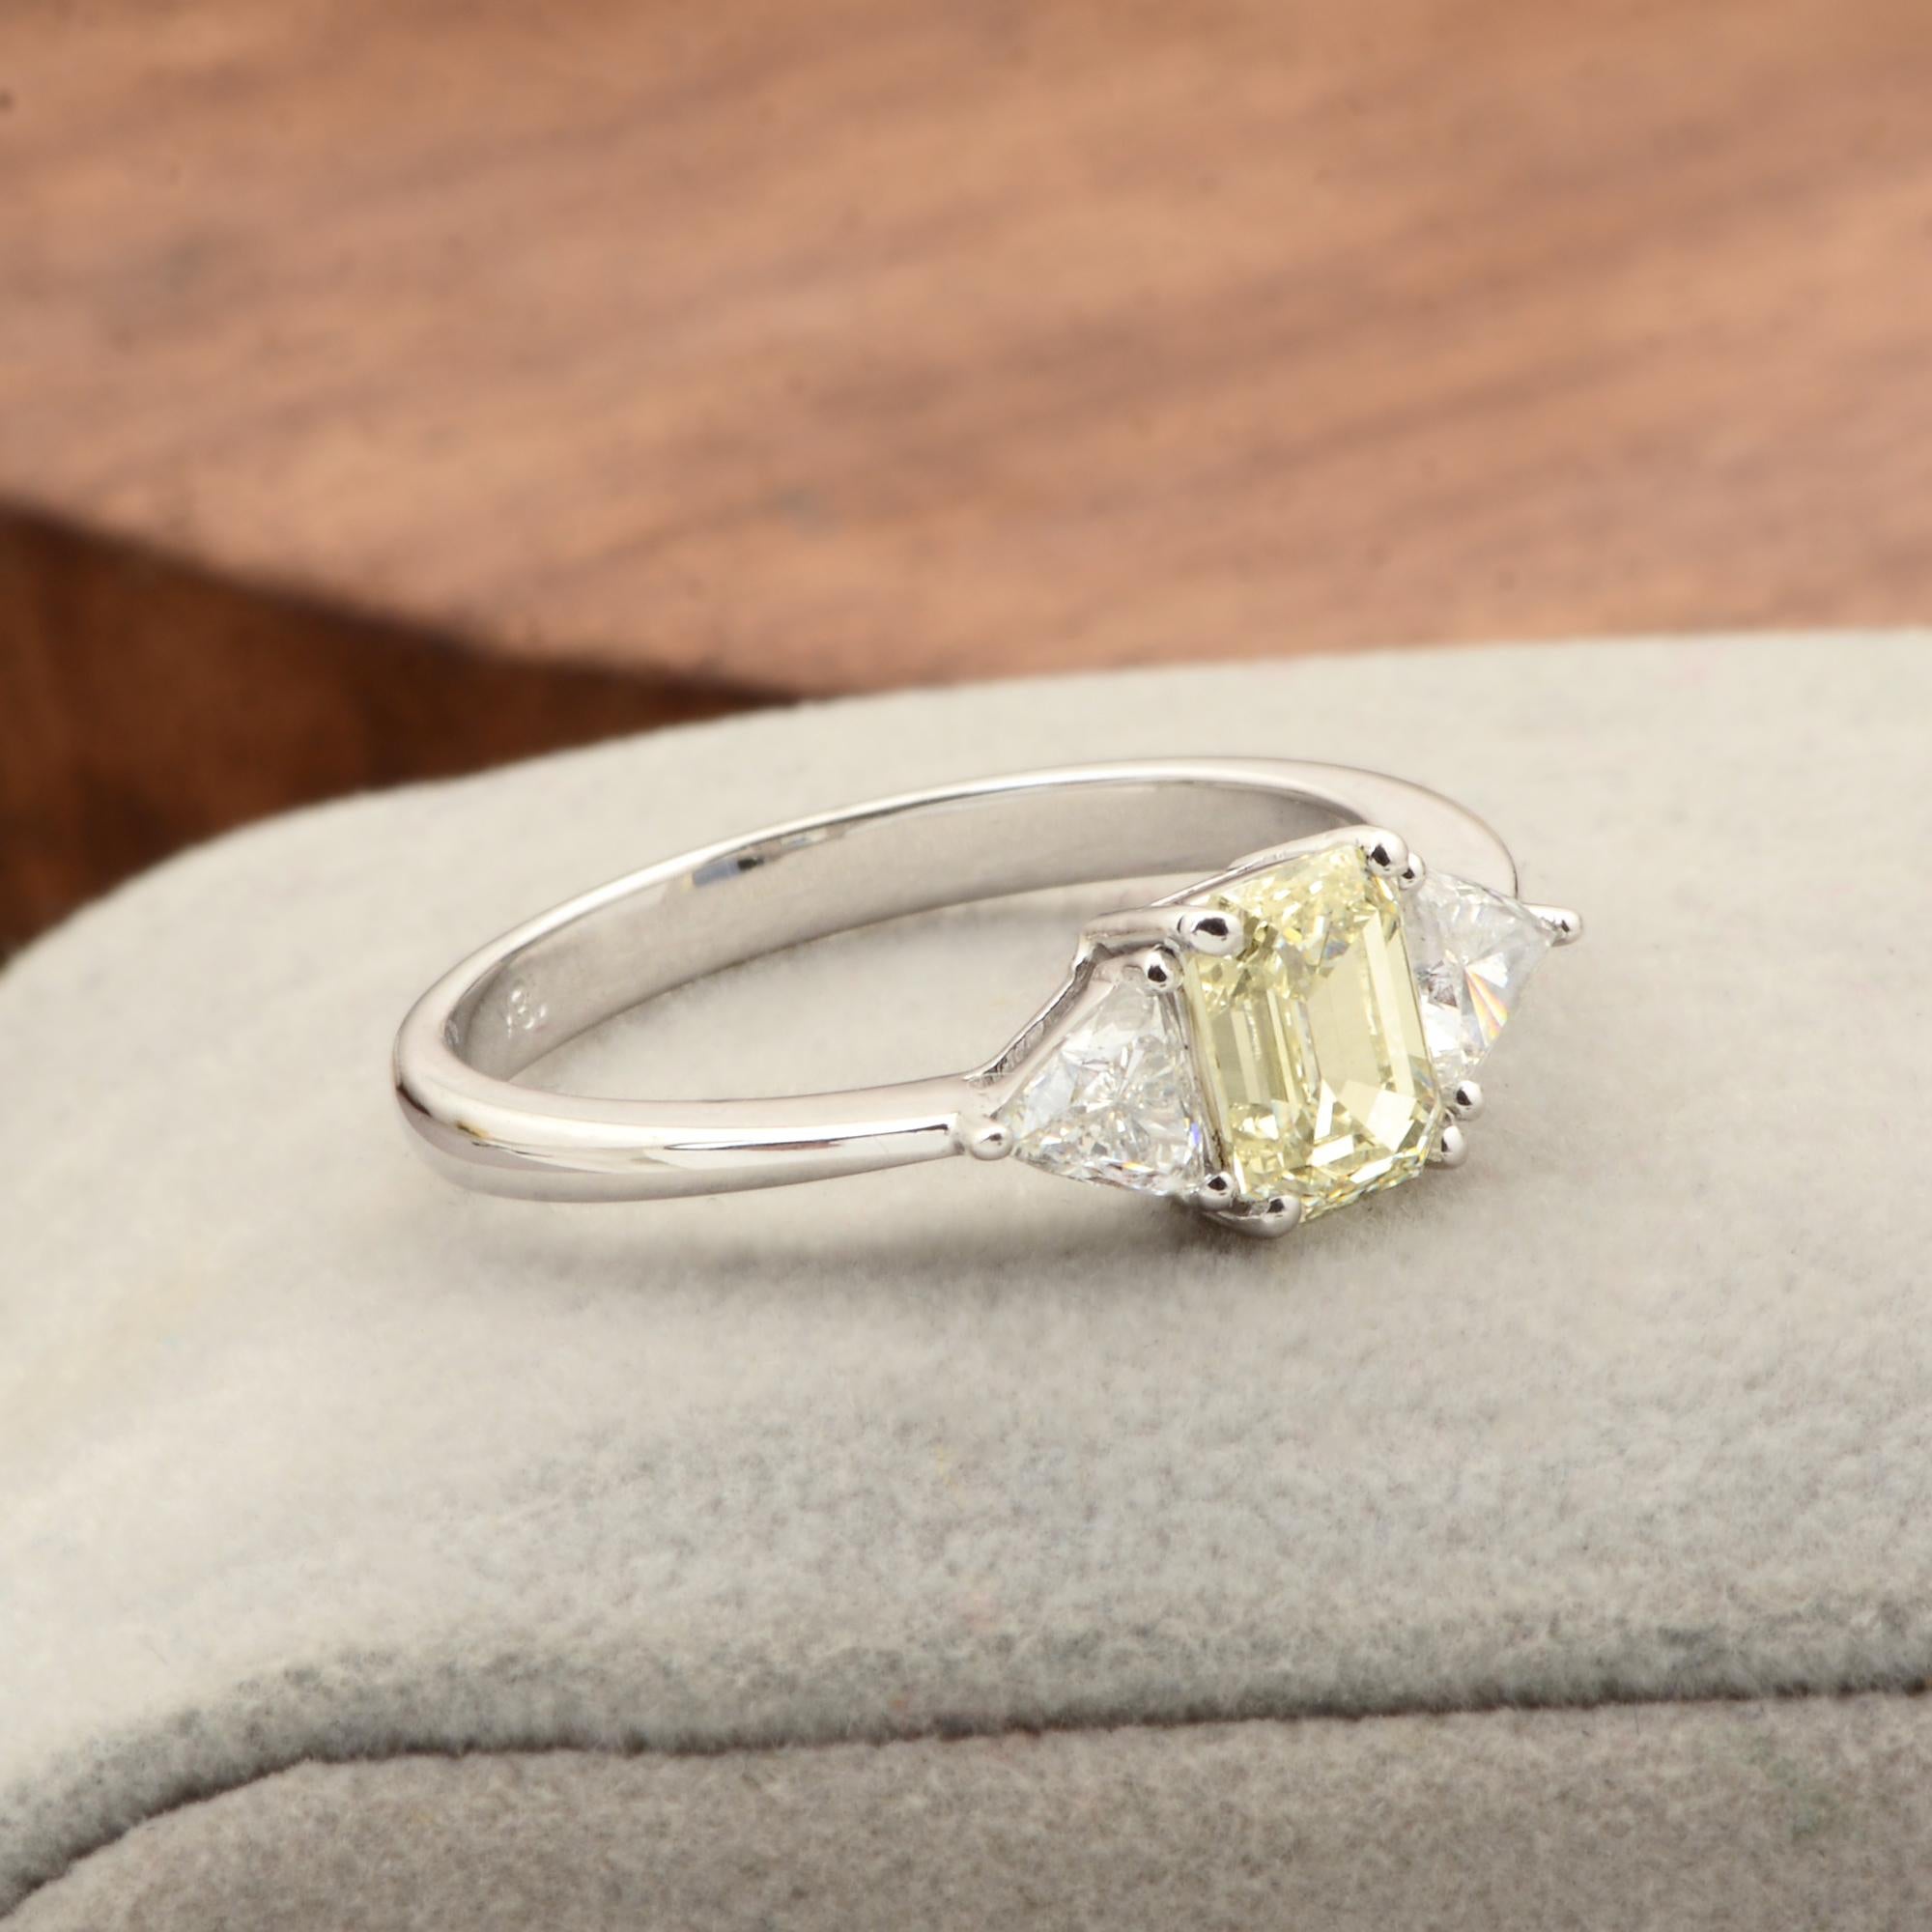 For Sale:  Natural 1.53 Carat SI Clarity HI Color Diamond Ring Solid 18k White Gold Jewelry 3